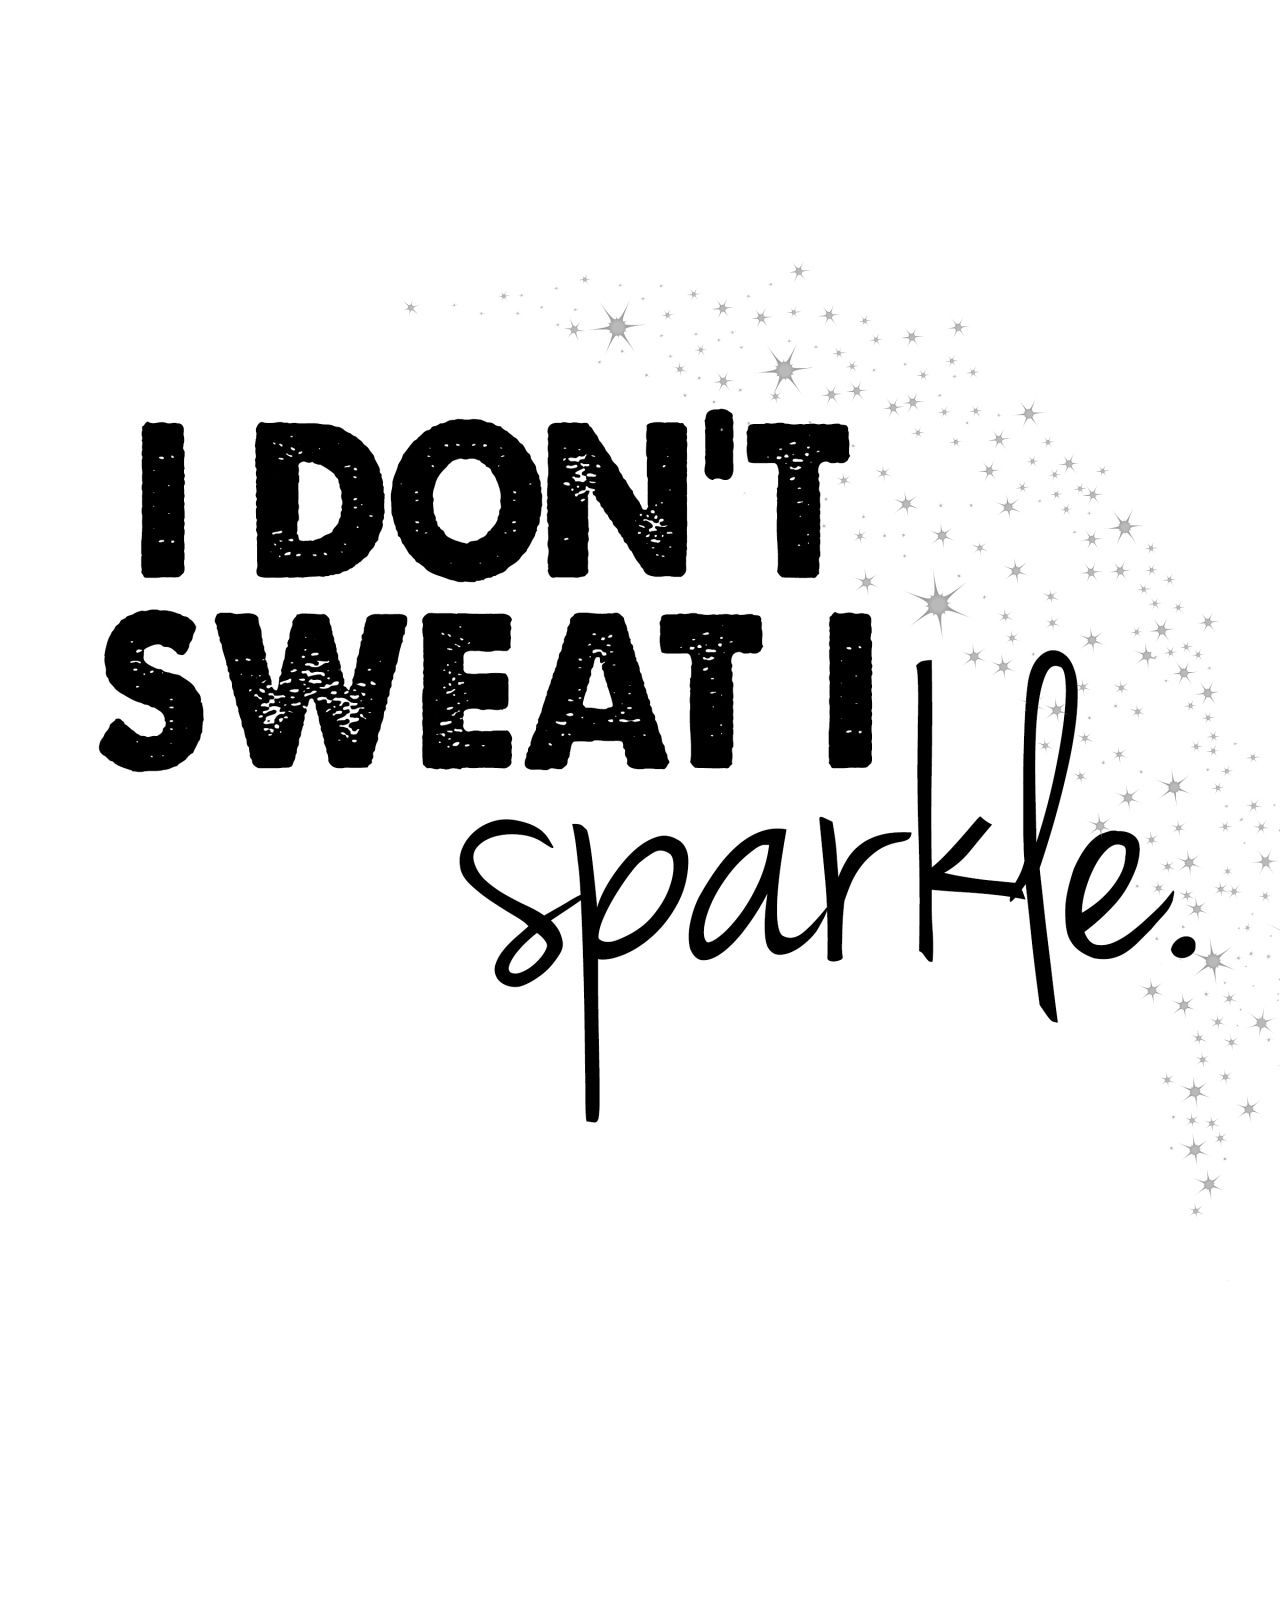 Free Cheer Printables - Free Cheer Printables -   11 thursday fitness Quotes ideas